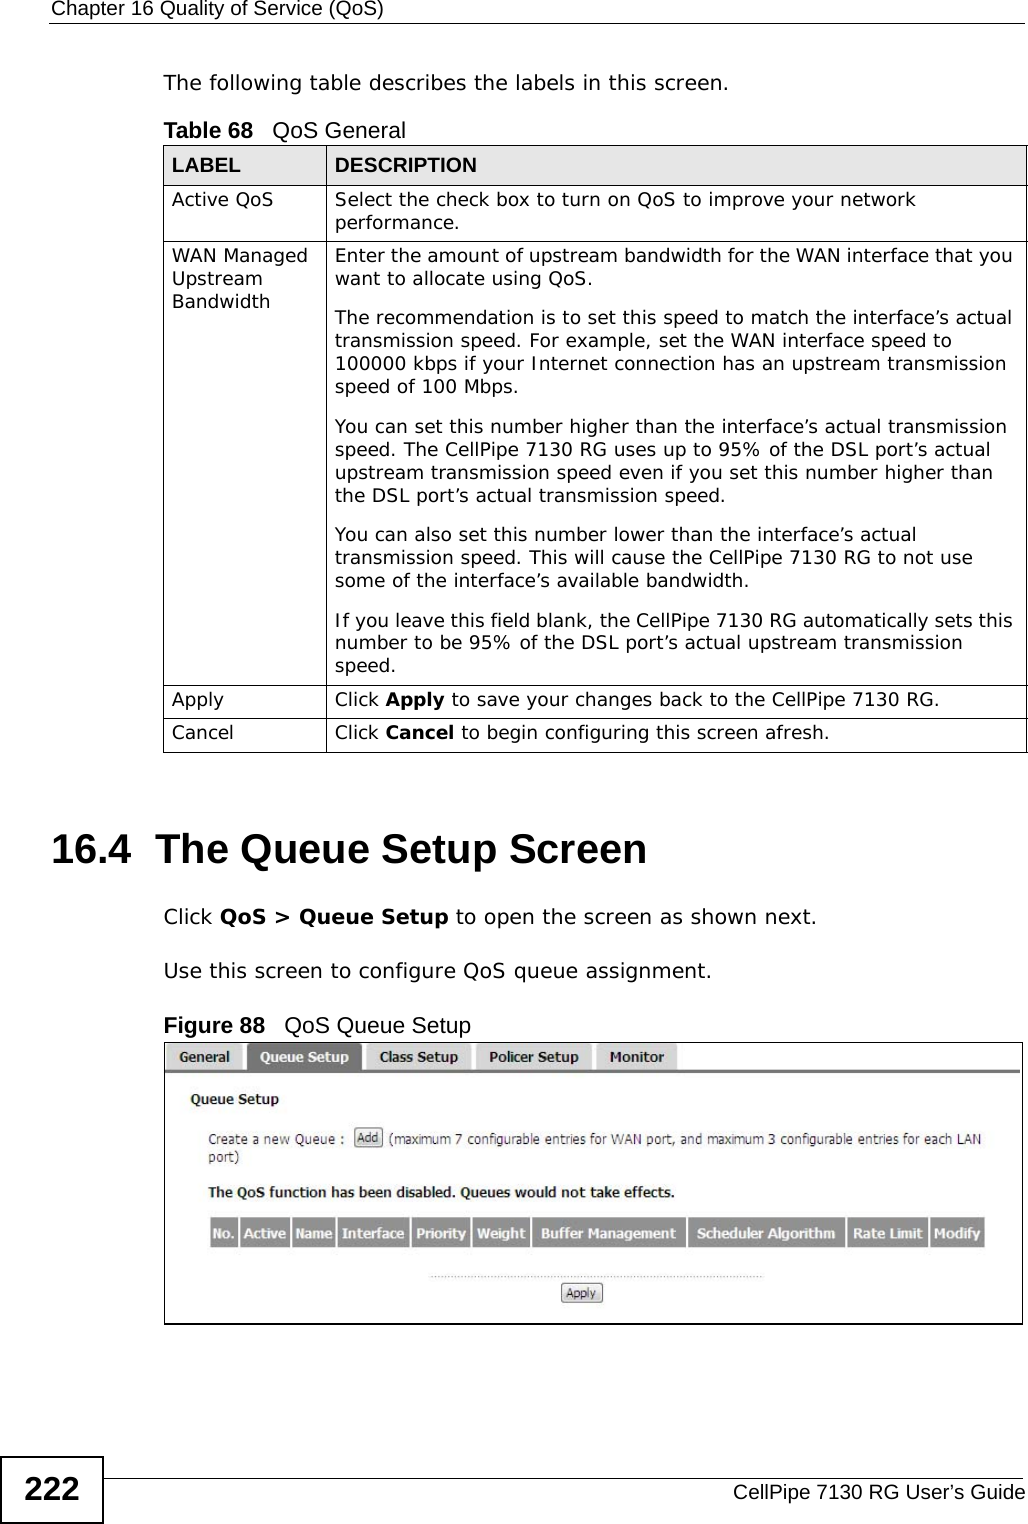 Chapter 16 Quality of Service (QoS)CellPipe 7130 RG User’s Guide222The following table describes the labels in this screen. 16.4  The Queue Setup ScreenClick QoS &gt; Queue Setup to open the screen as shown next. Use this screen to configure QoS queue assignment. Figure 88   QoS Queue Setup Table 68   QoS GeneralLABEL DESCRIPTIONActive QoS Select the check box to turn on QoS to improve your network performance. WAN Managed Upstream Bandwidth Enter the amount of upstream bandwidth for the WAN interface that you want to allocate using QoS. The recommendation is to set this speed to match the interface’s actual transmission speed. For example, set the WAN interface speed to 100000 kbps if your Internet connection has an upstream transmission speed of 100 Mbps.        You can set this number higher than the interface’s actual transmission speed. The CellPipe 7130 RG uses up to 95% of the DSL port’s actual upstream transmission speed even if you set this number higher than the DSL port’s actual transmission speed.You can also set this number lower than the interface’s actual transmission speed. This will cause the CellPipe 7130 RG to not use some of the interface’s available bandwidth.If you leave this field blank, the CellPipe 7130 RG automatically sets this number to be 95% of the DSL port’s actual upstream transmission speed.Apply Click Apply to save your changes back to the CellPipe 7130 RG.Cancel Click Cancel to begin configuring this screen afresh.